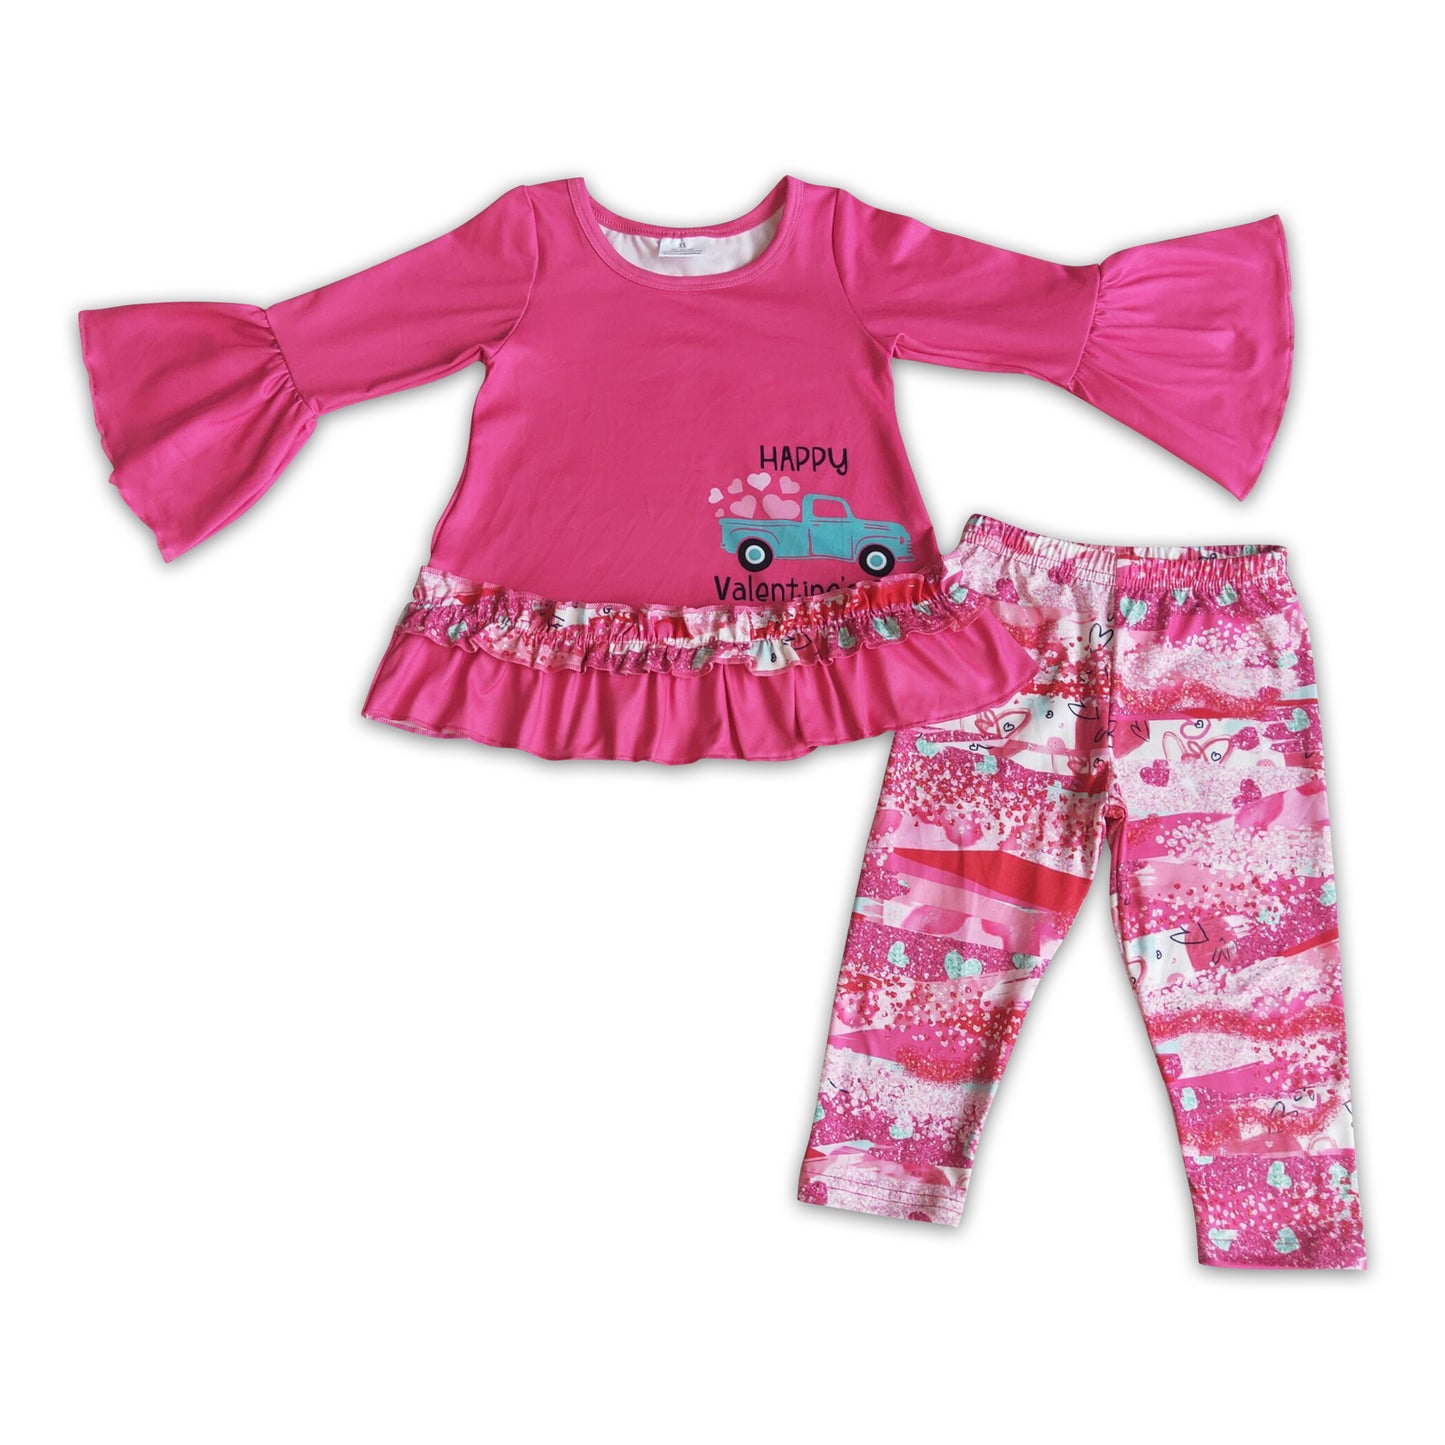 Happy valentine's shirt leggings baby girls cute outfits